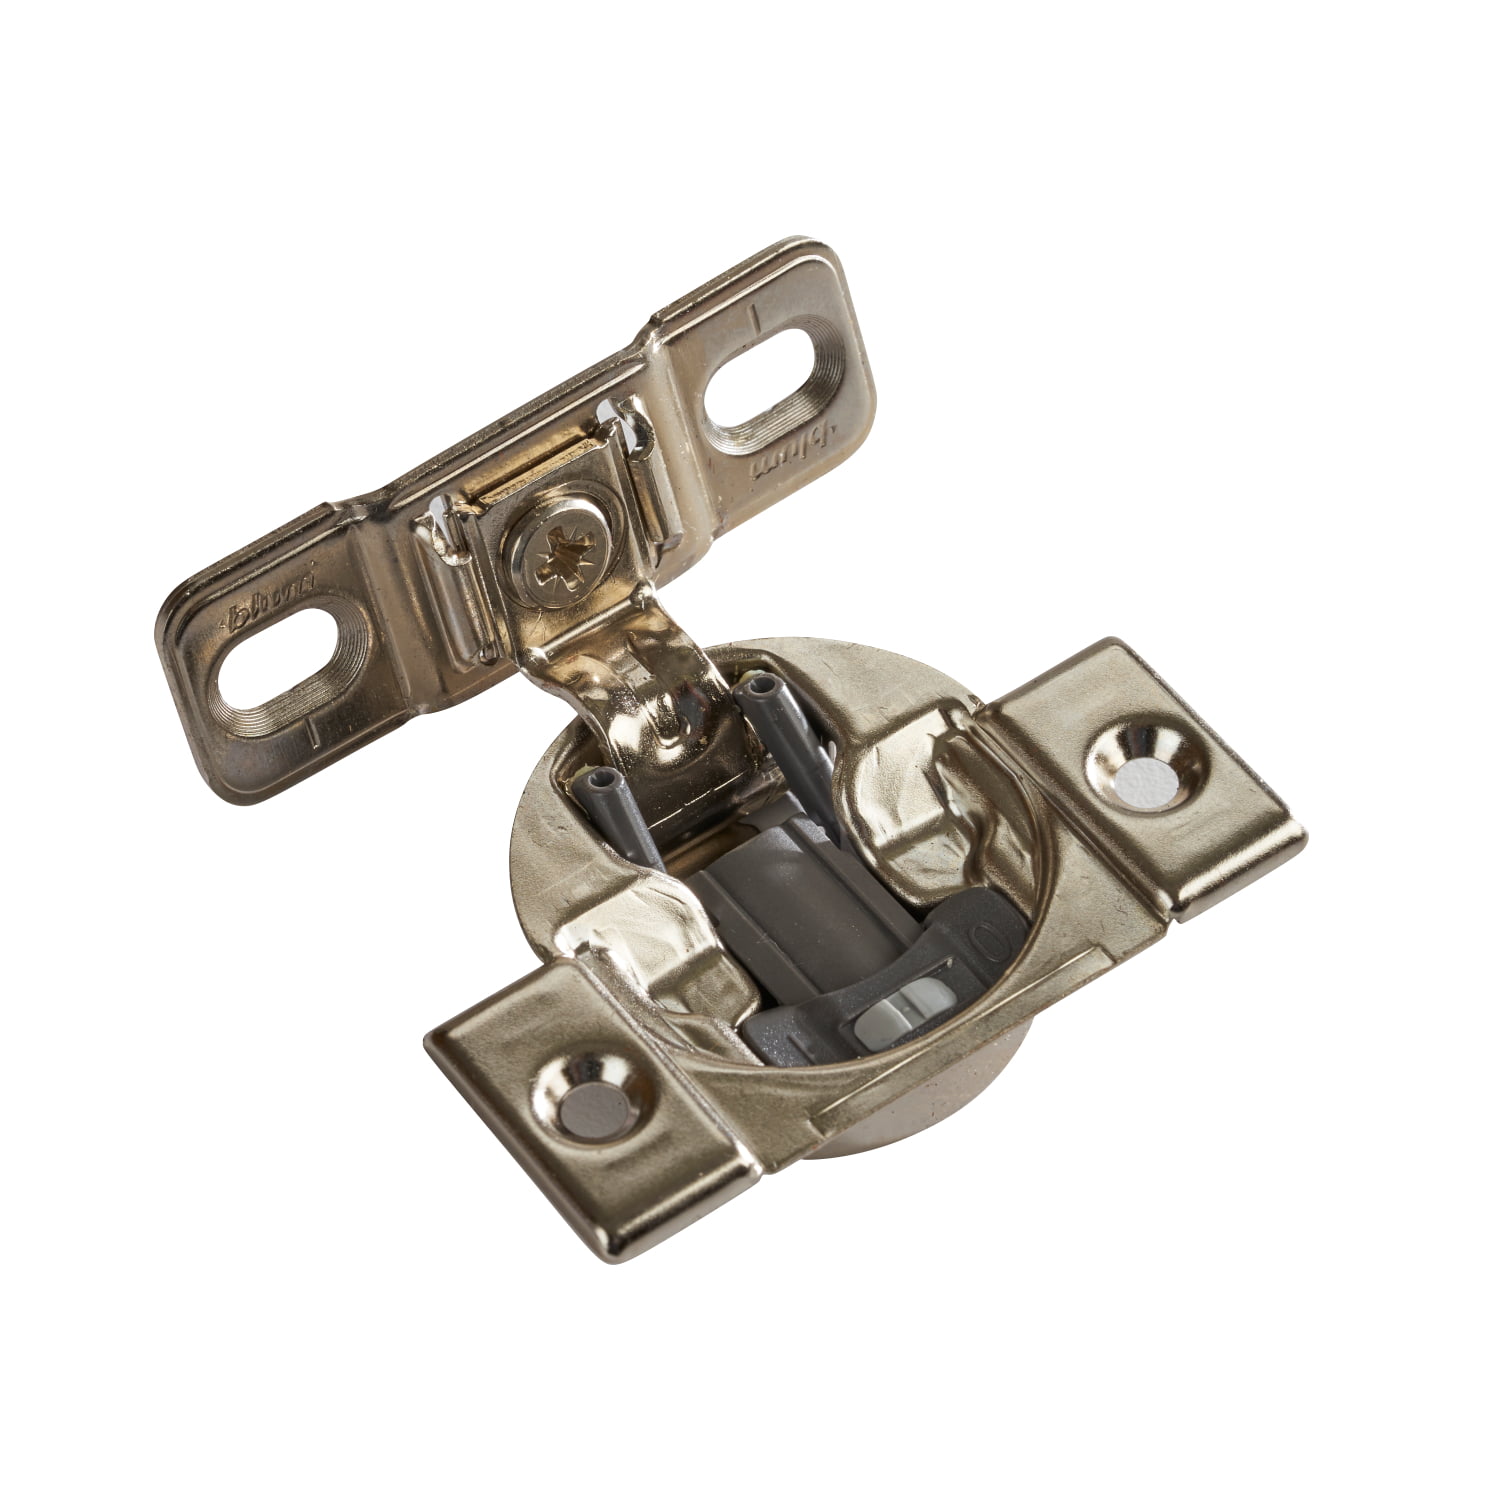 Blum Compact Blumotion 38B 13/8" Overlay or Greater, 107 Degree Soft Closing Hinge for